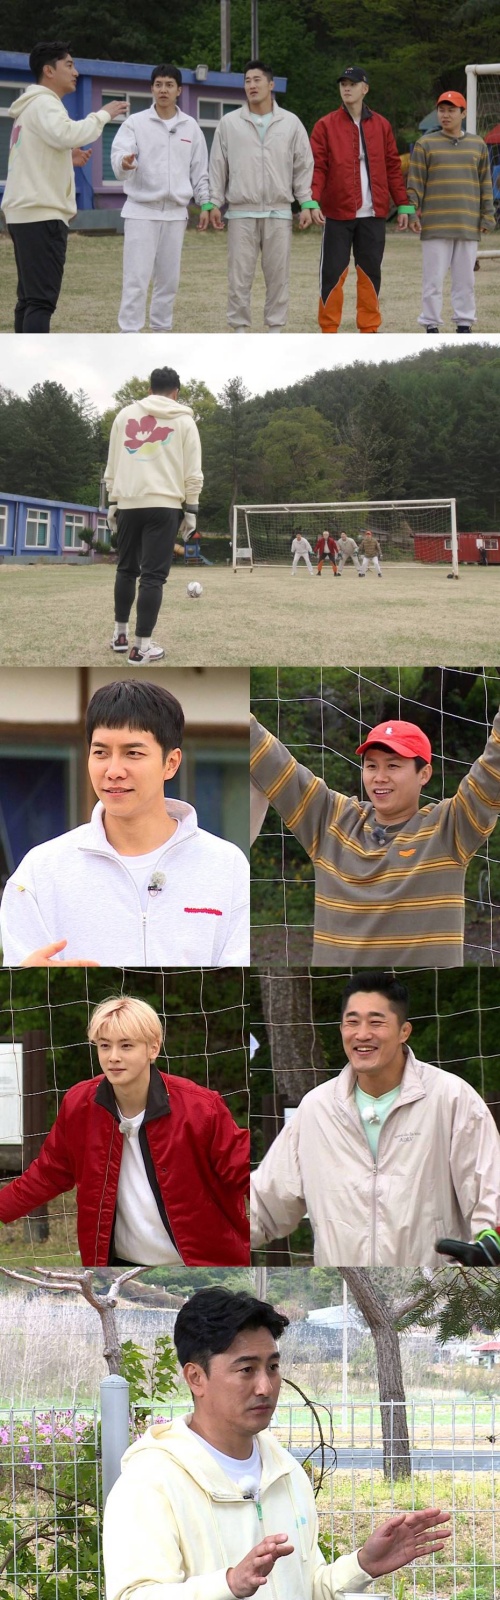 On SBS All The Butlers, which is broadcasted at 6:25 pm on the 16th, there will be a match between Master Ahn Jung-hwan and members of Eleven Goal - 3D Football Penalty Shootout Ga.SBS All The Butlers members proposed a surprise confrontation with Korean football legend Ahn Jung-hwan to prove the strong teamwork between each other.The ambitious confrontation proposed by the members was Eleven Goal - 3D Football Penalty Shootout Ga, which decided to go straight to work when the members won, and to train the extreme teamwork until 9 pm when Ahn Jung-hwan won.In an extraordinary condition, he showed his burning desire to the Master as well as the members.In the Eleven Goal - 3D Football Penalty Shootout Ga confrontation between Ahn Jung-hwan and members, there was a chewy tension that hit the 2002 Korea-Japan World Cup.In particular, Ahn Jung-hwan showed a different level of power shooting despite the handicap that had to be shot with his left foot.On the other hand, Kim Dong-Hyun, who is also a student of Ahn Jung-hwan, showed an unexpected big match by showing Kang Gangsullae (?) shooting to embarrass Master.Indeed, members are looking forward to showing a sticky teamwork to write a band-to-band drama against the legendary national representative, Ahn Jung-hwan.Meanwhile, Ahn Jung-hwan turned the scene upside down with a bomb comment during a teamwork special.Ahn Jung-hwan said, I was not going to broadcast until next year.The members, as well as everyone on the scene, were shocked, and I wonder what the whole story of Ahn Jung-hwans failure was.SBS